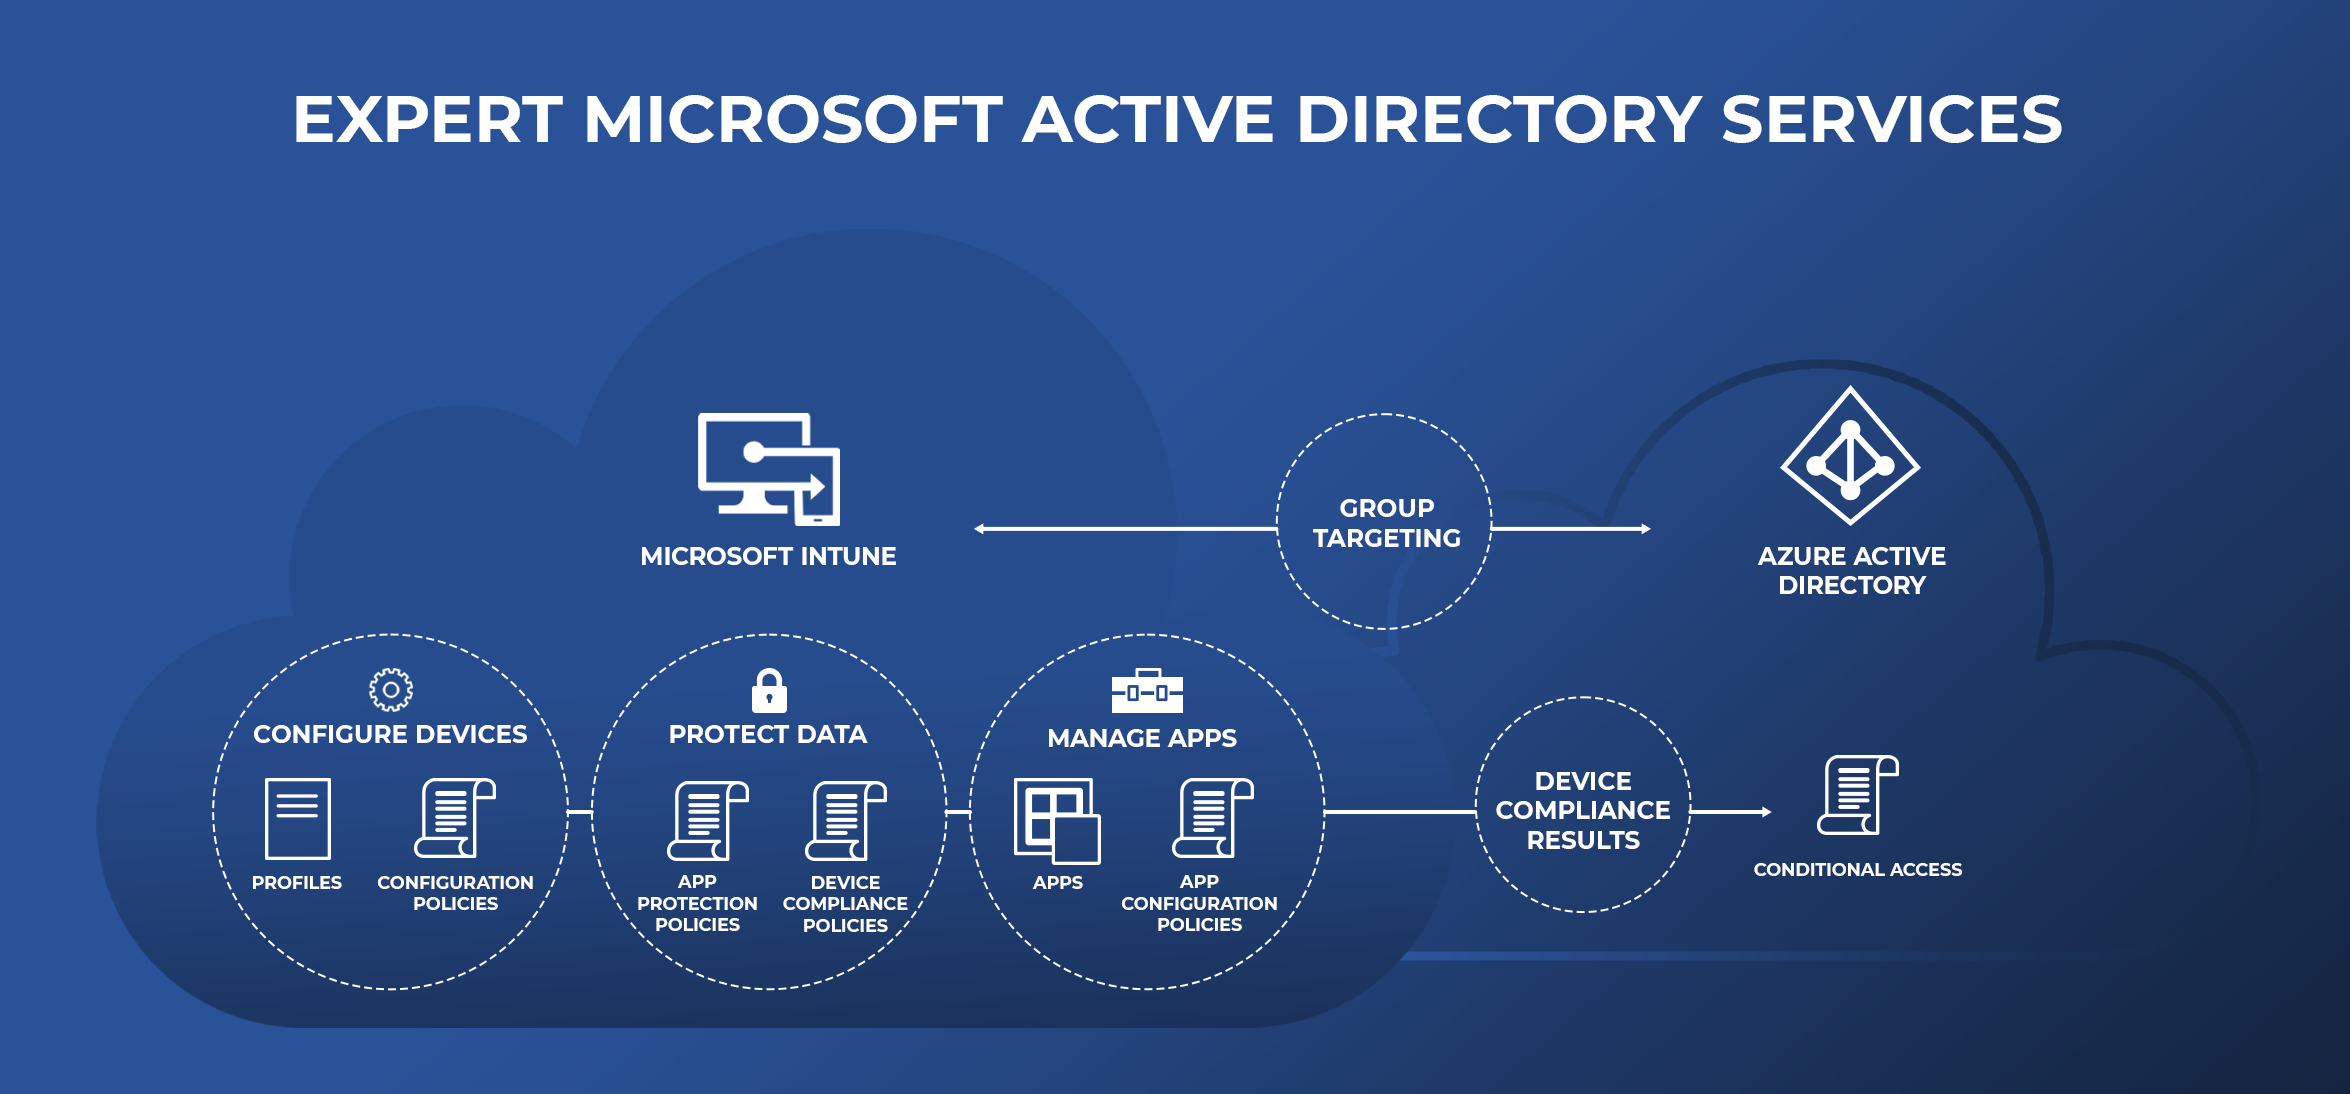 Microsoft Active Directory without Managed Services